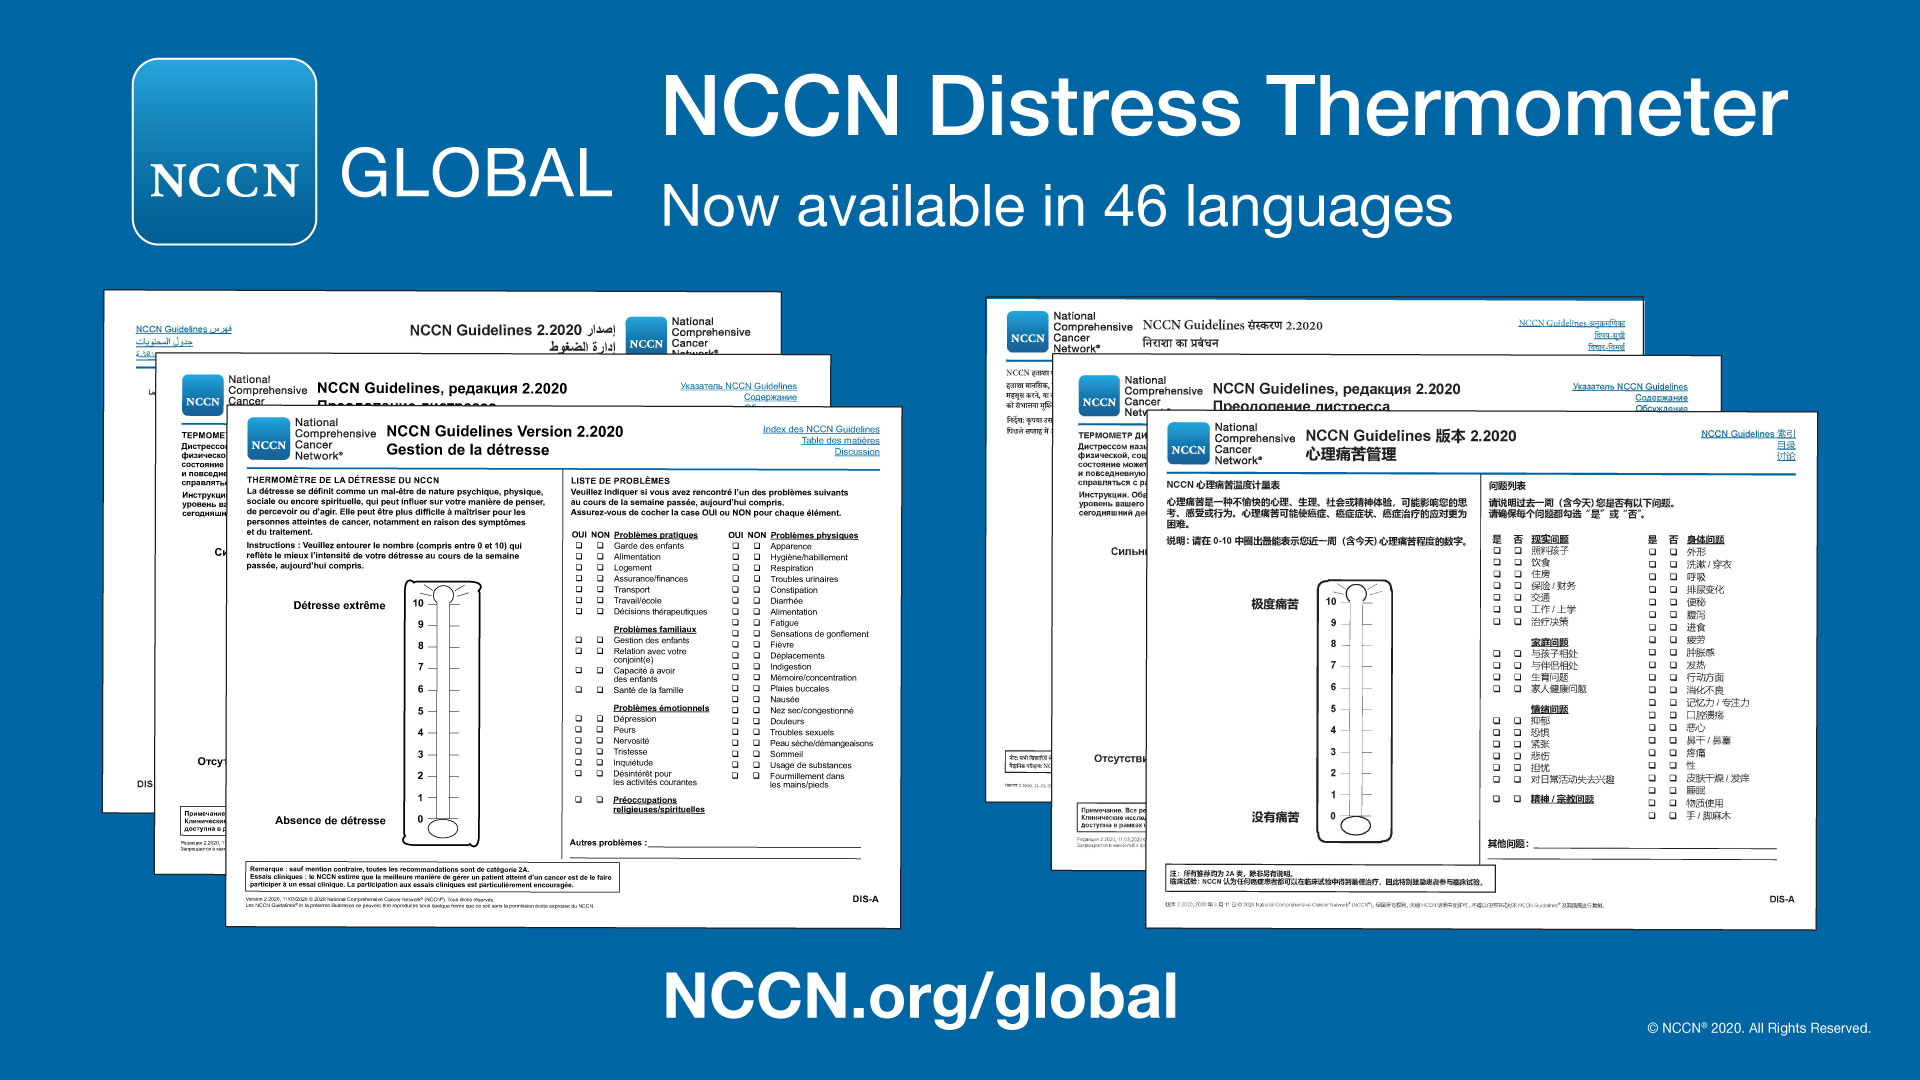 NCCN Distress Thermometer